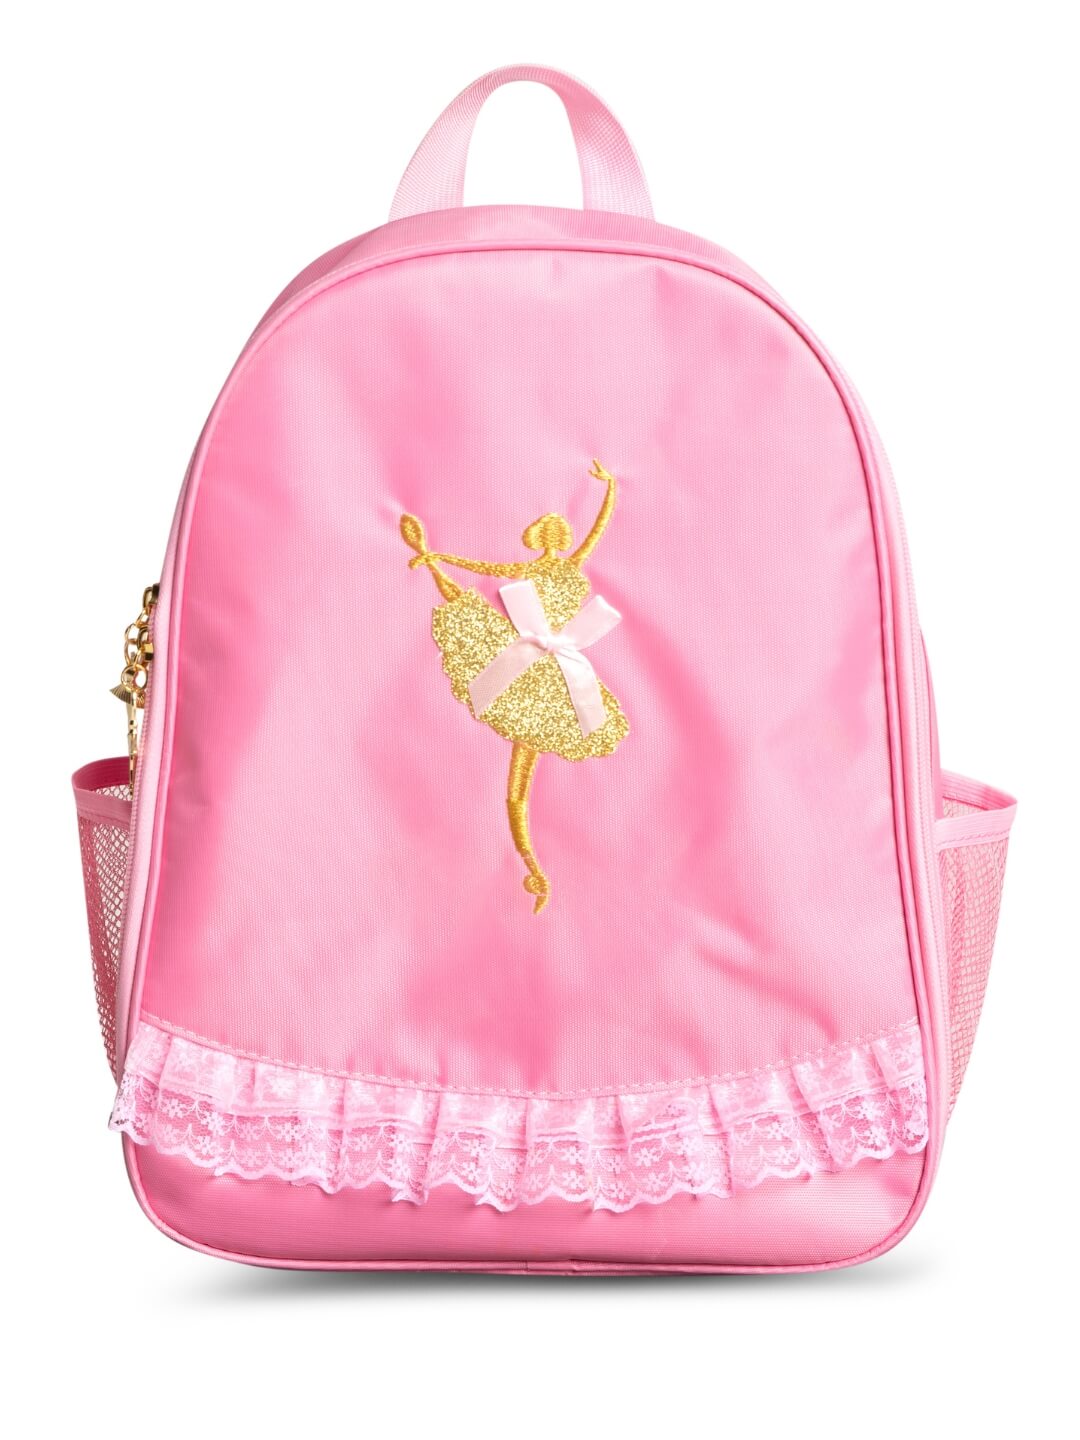 Amazon.com: Pink Dance Bags, Large Capacity Ballet Dance Bag, Dance Backpack,Personalized  Backpacks to Pack Dance Gear(Pink) : Sports & Outdoors